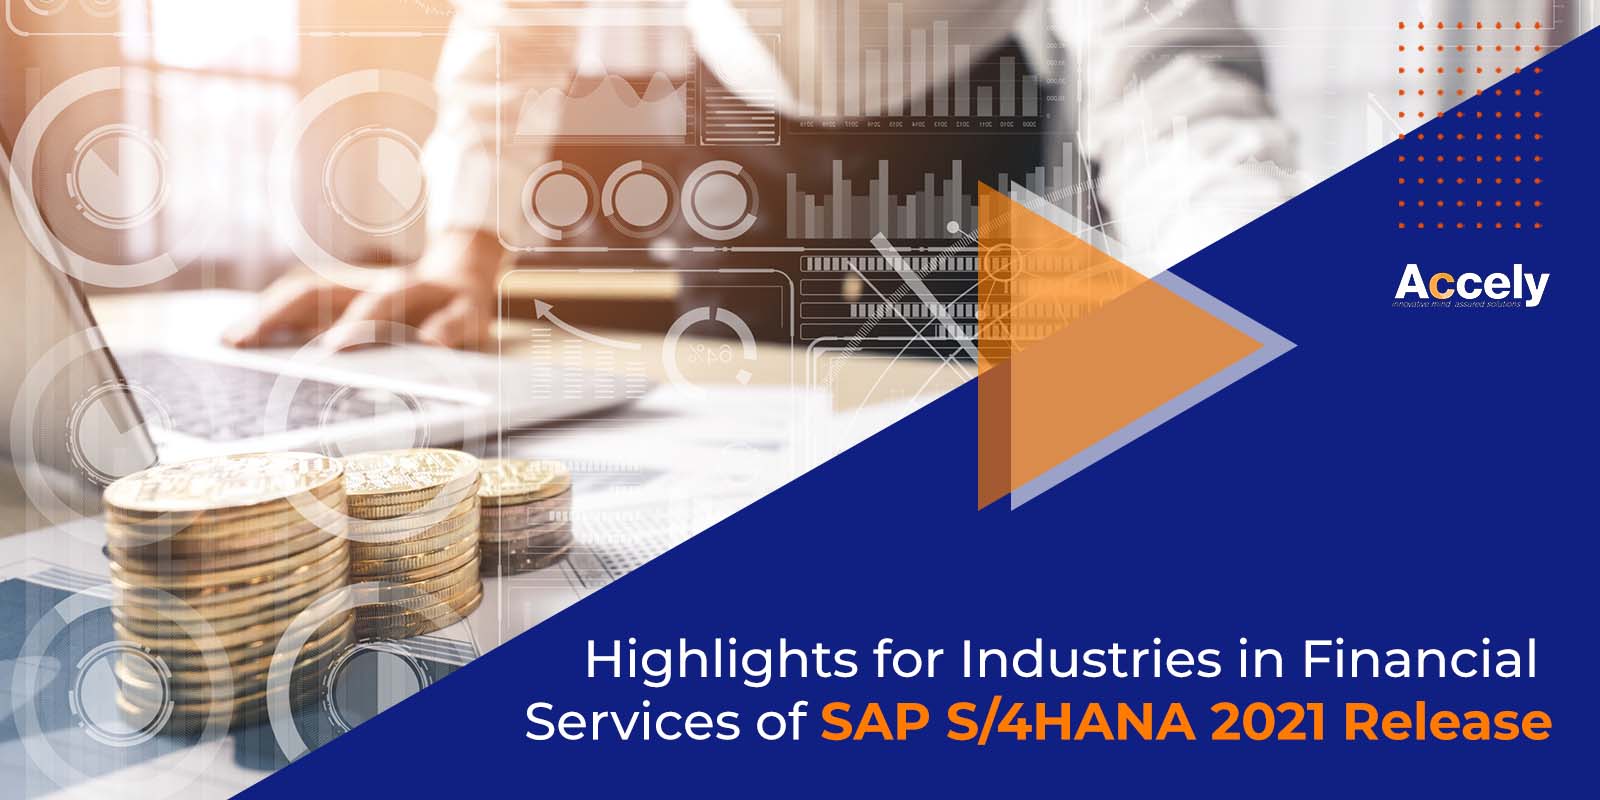 Highlights for Industries in Financial Services of SAP S/4HANA 2021 Release